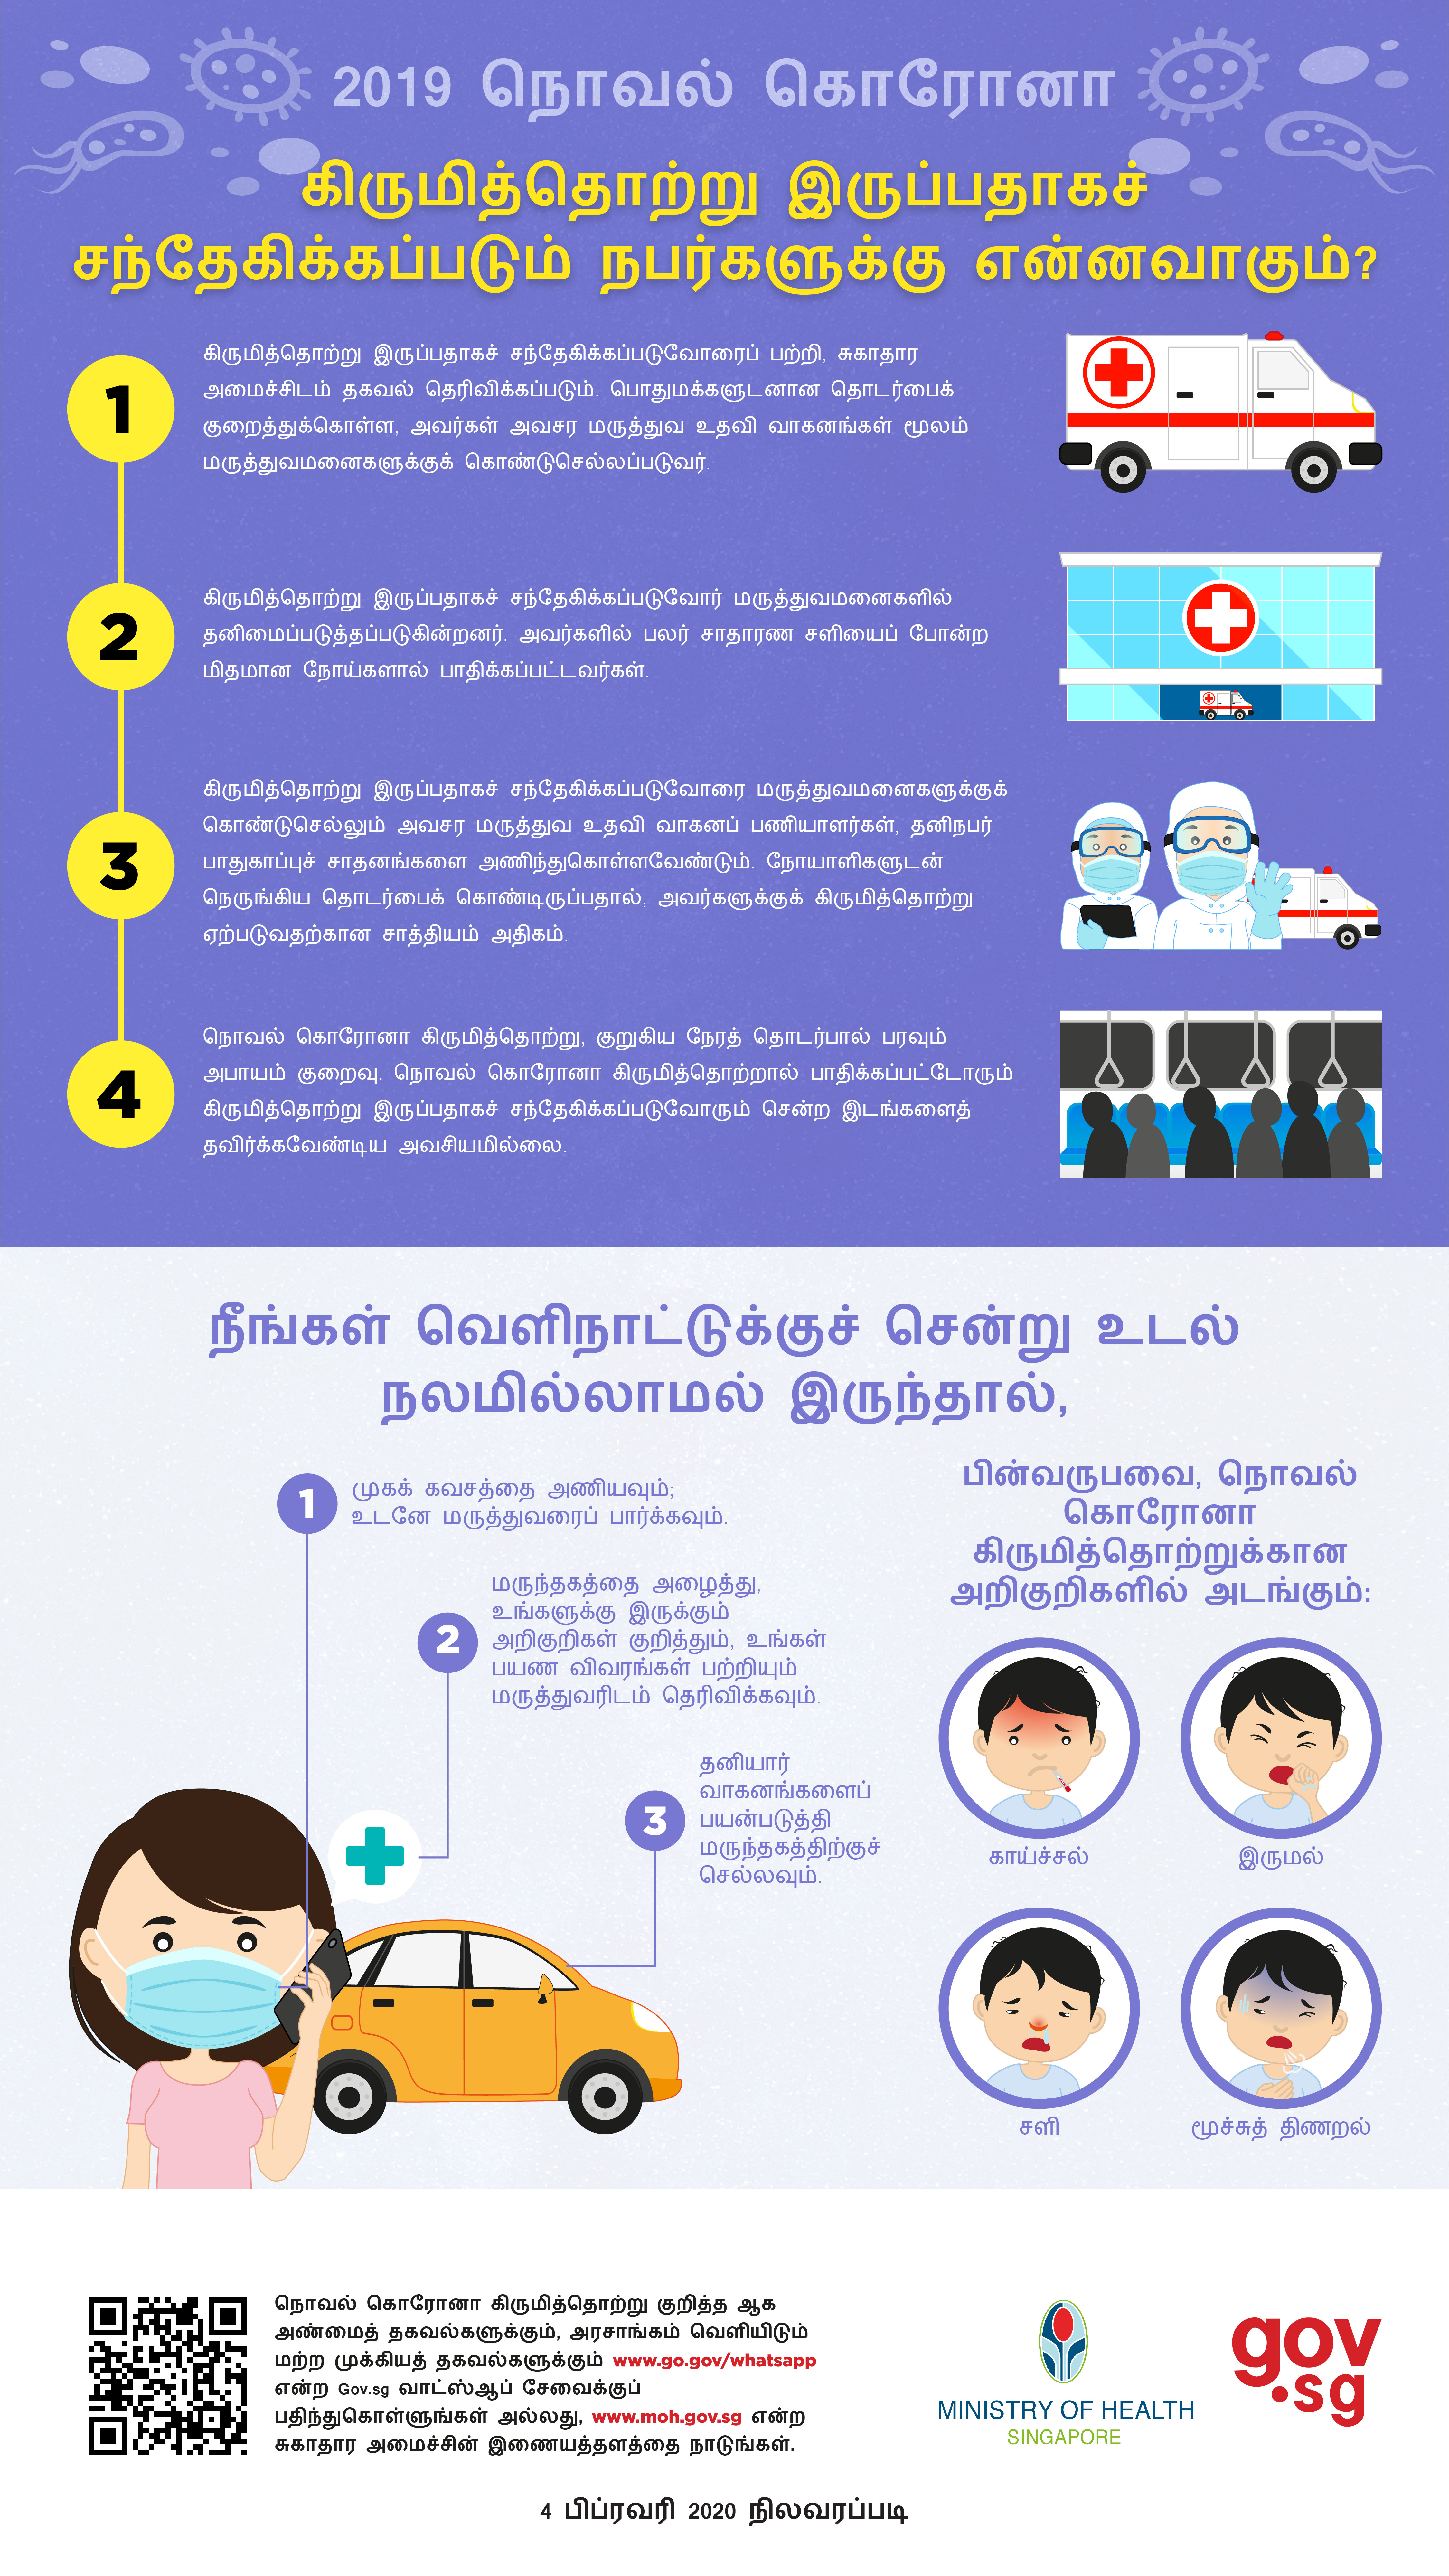 Tamil - How are suspect cases handled?